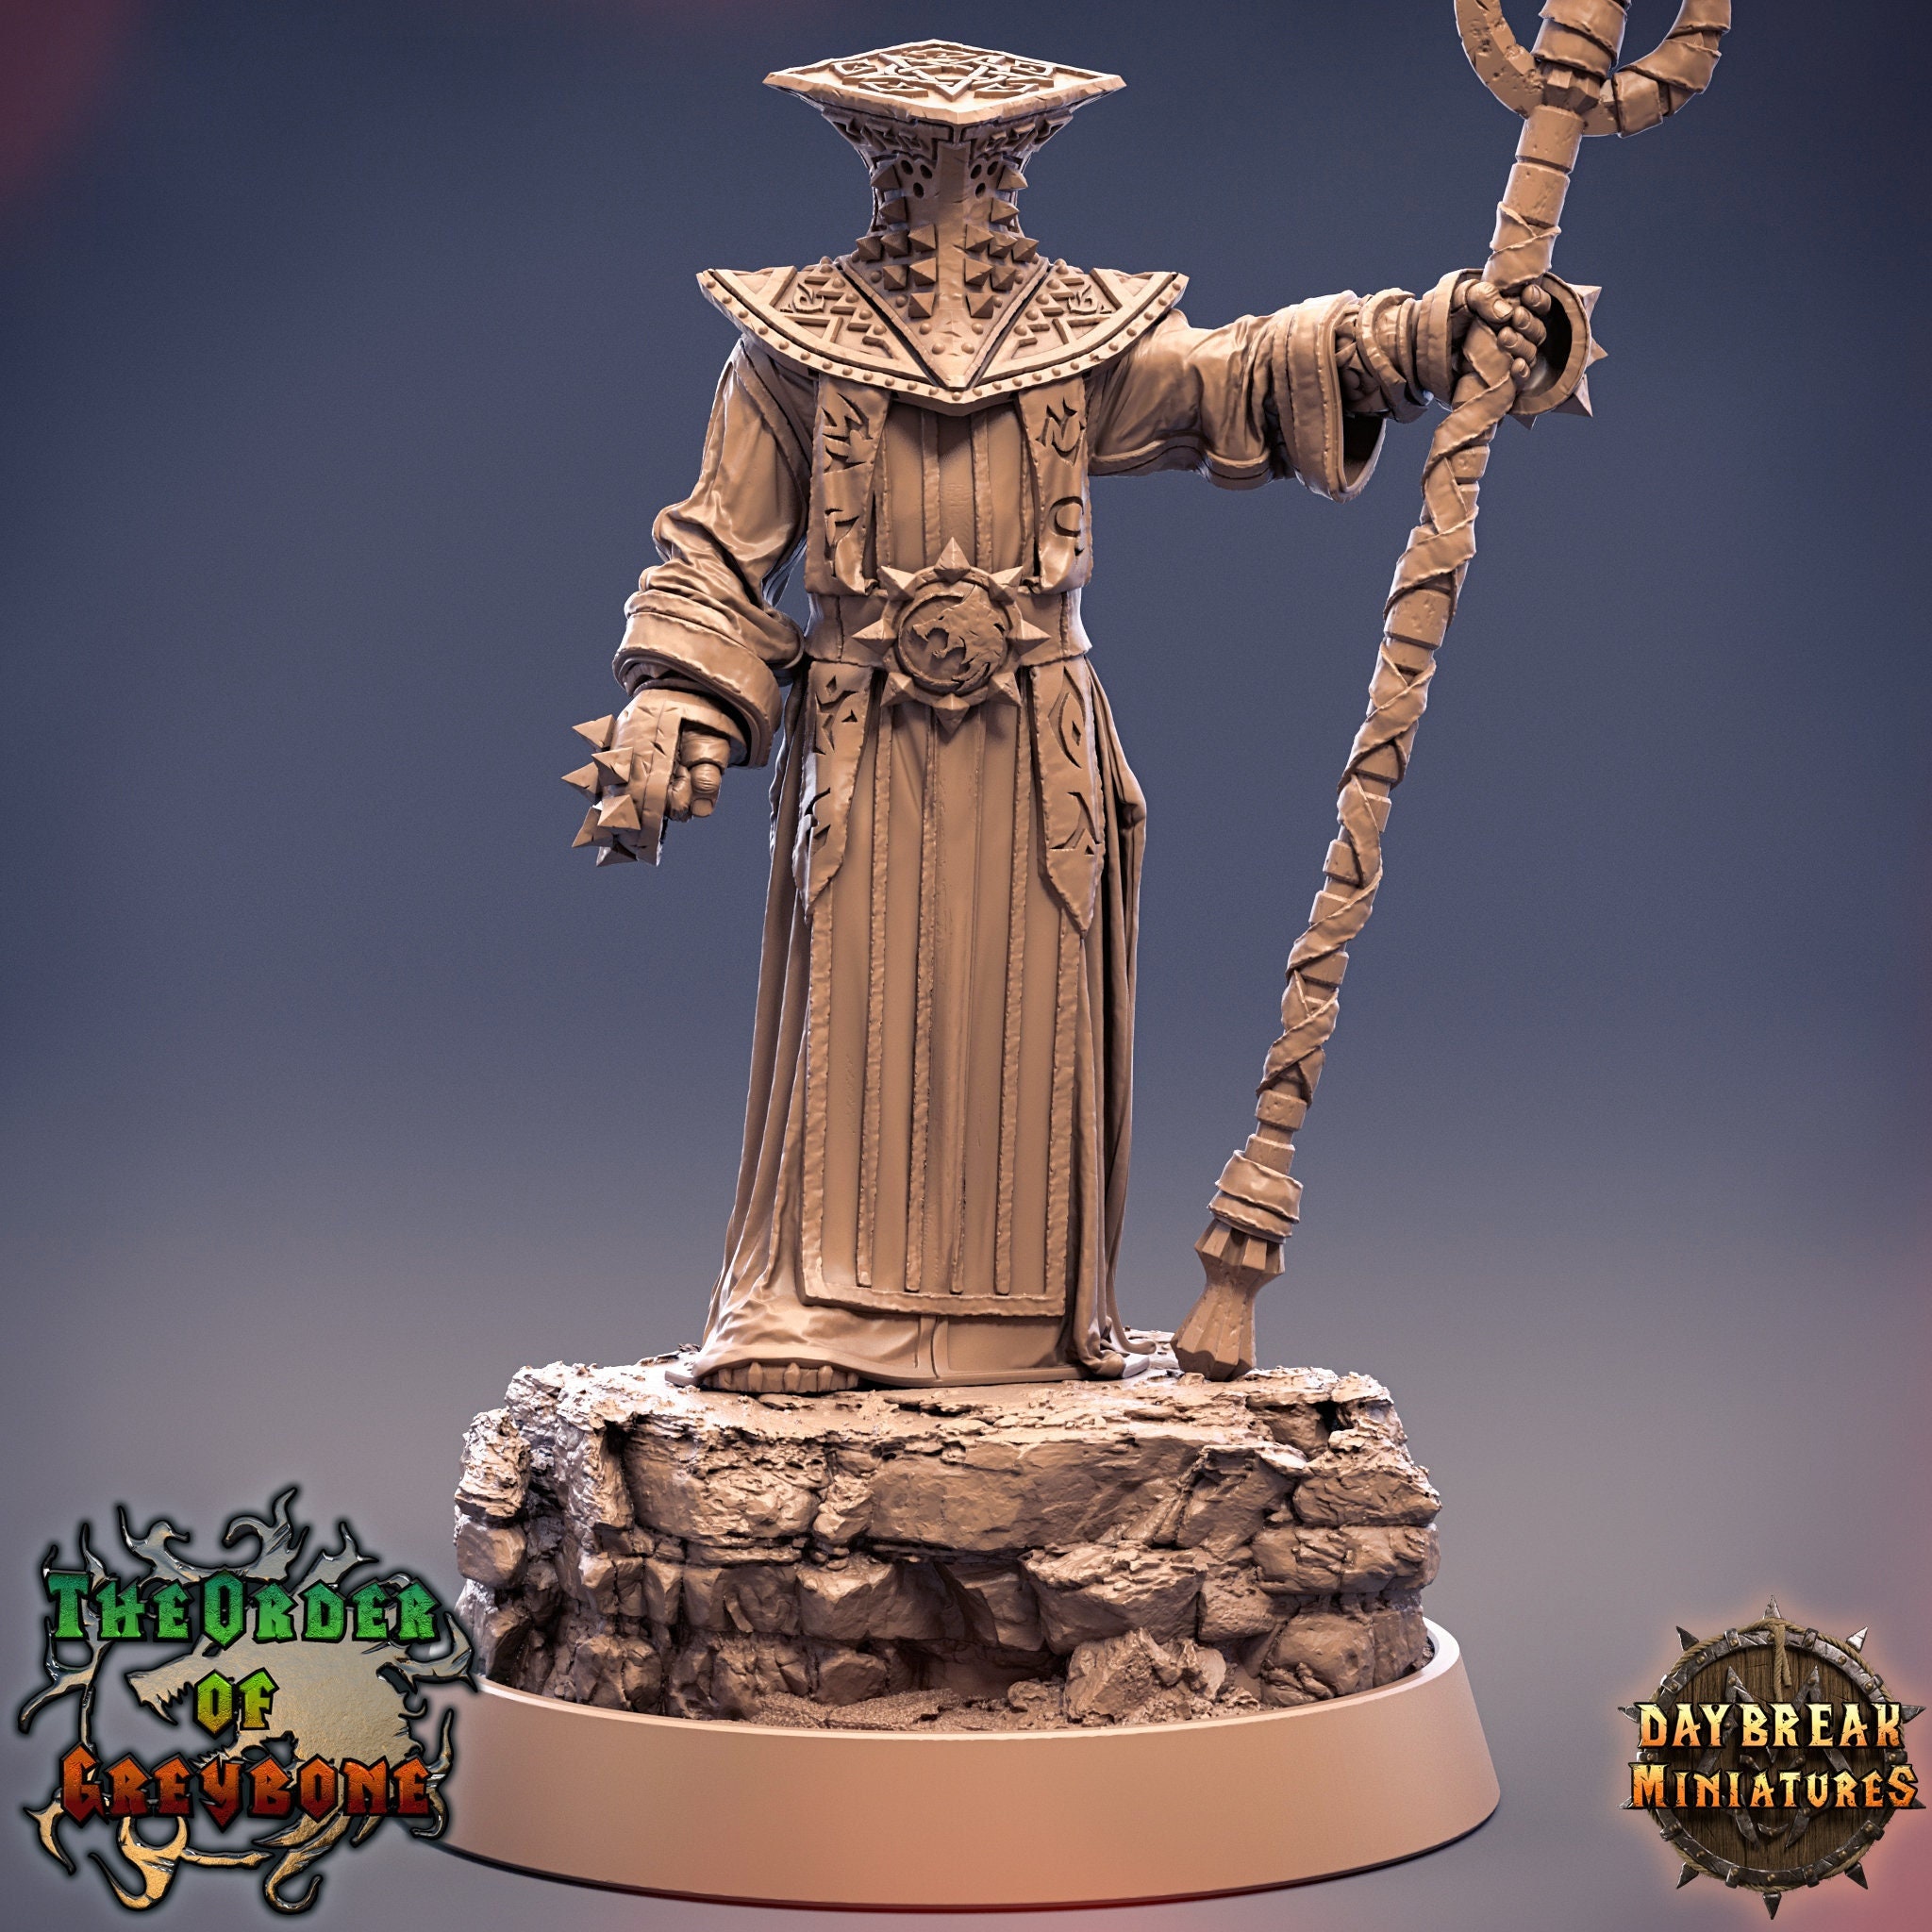 DnD Miniature Dark Mage of Chaos Mage Miniatures for Tabletop games like D&D or Warhammer| Daybreak Dark Cleric